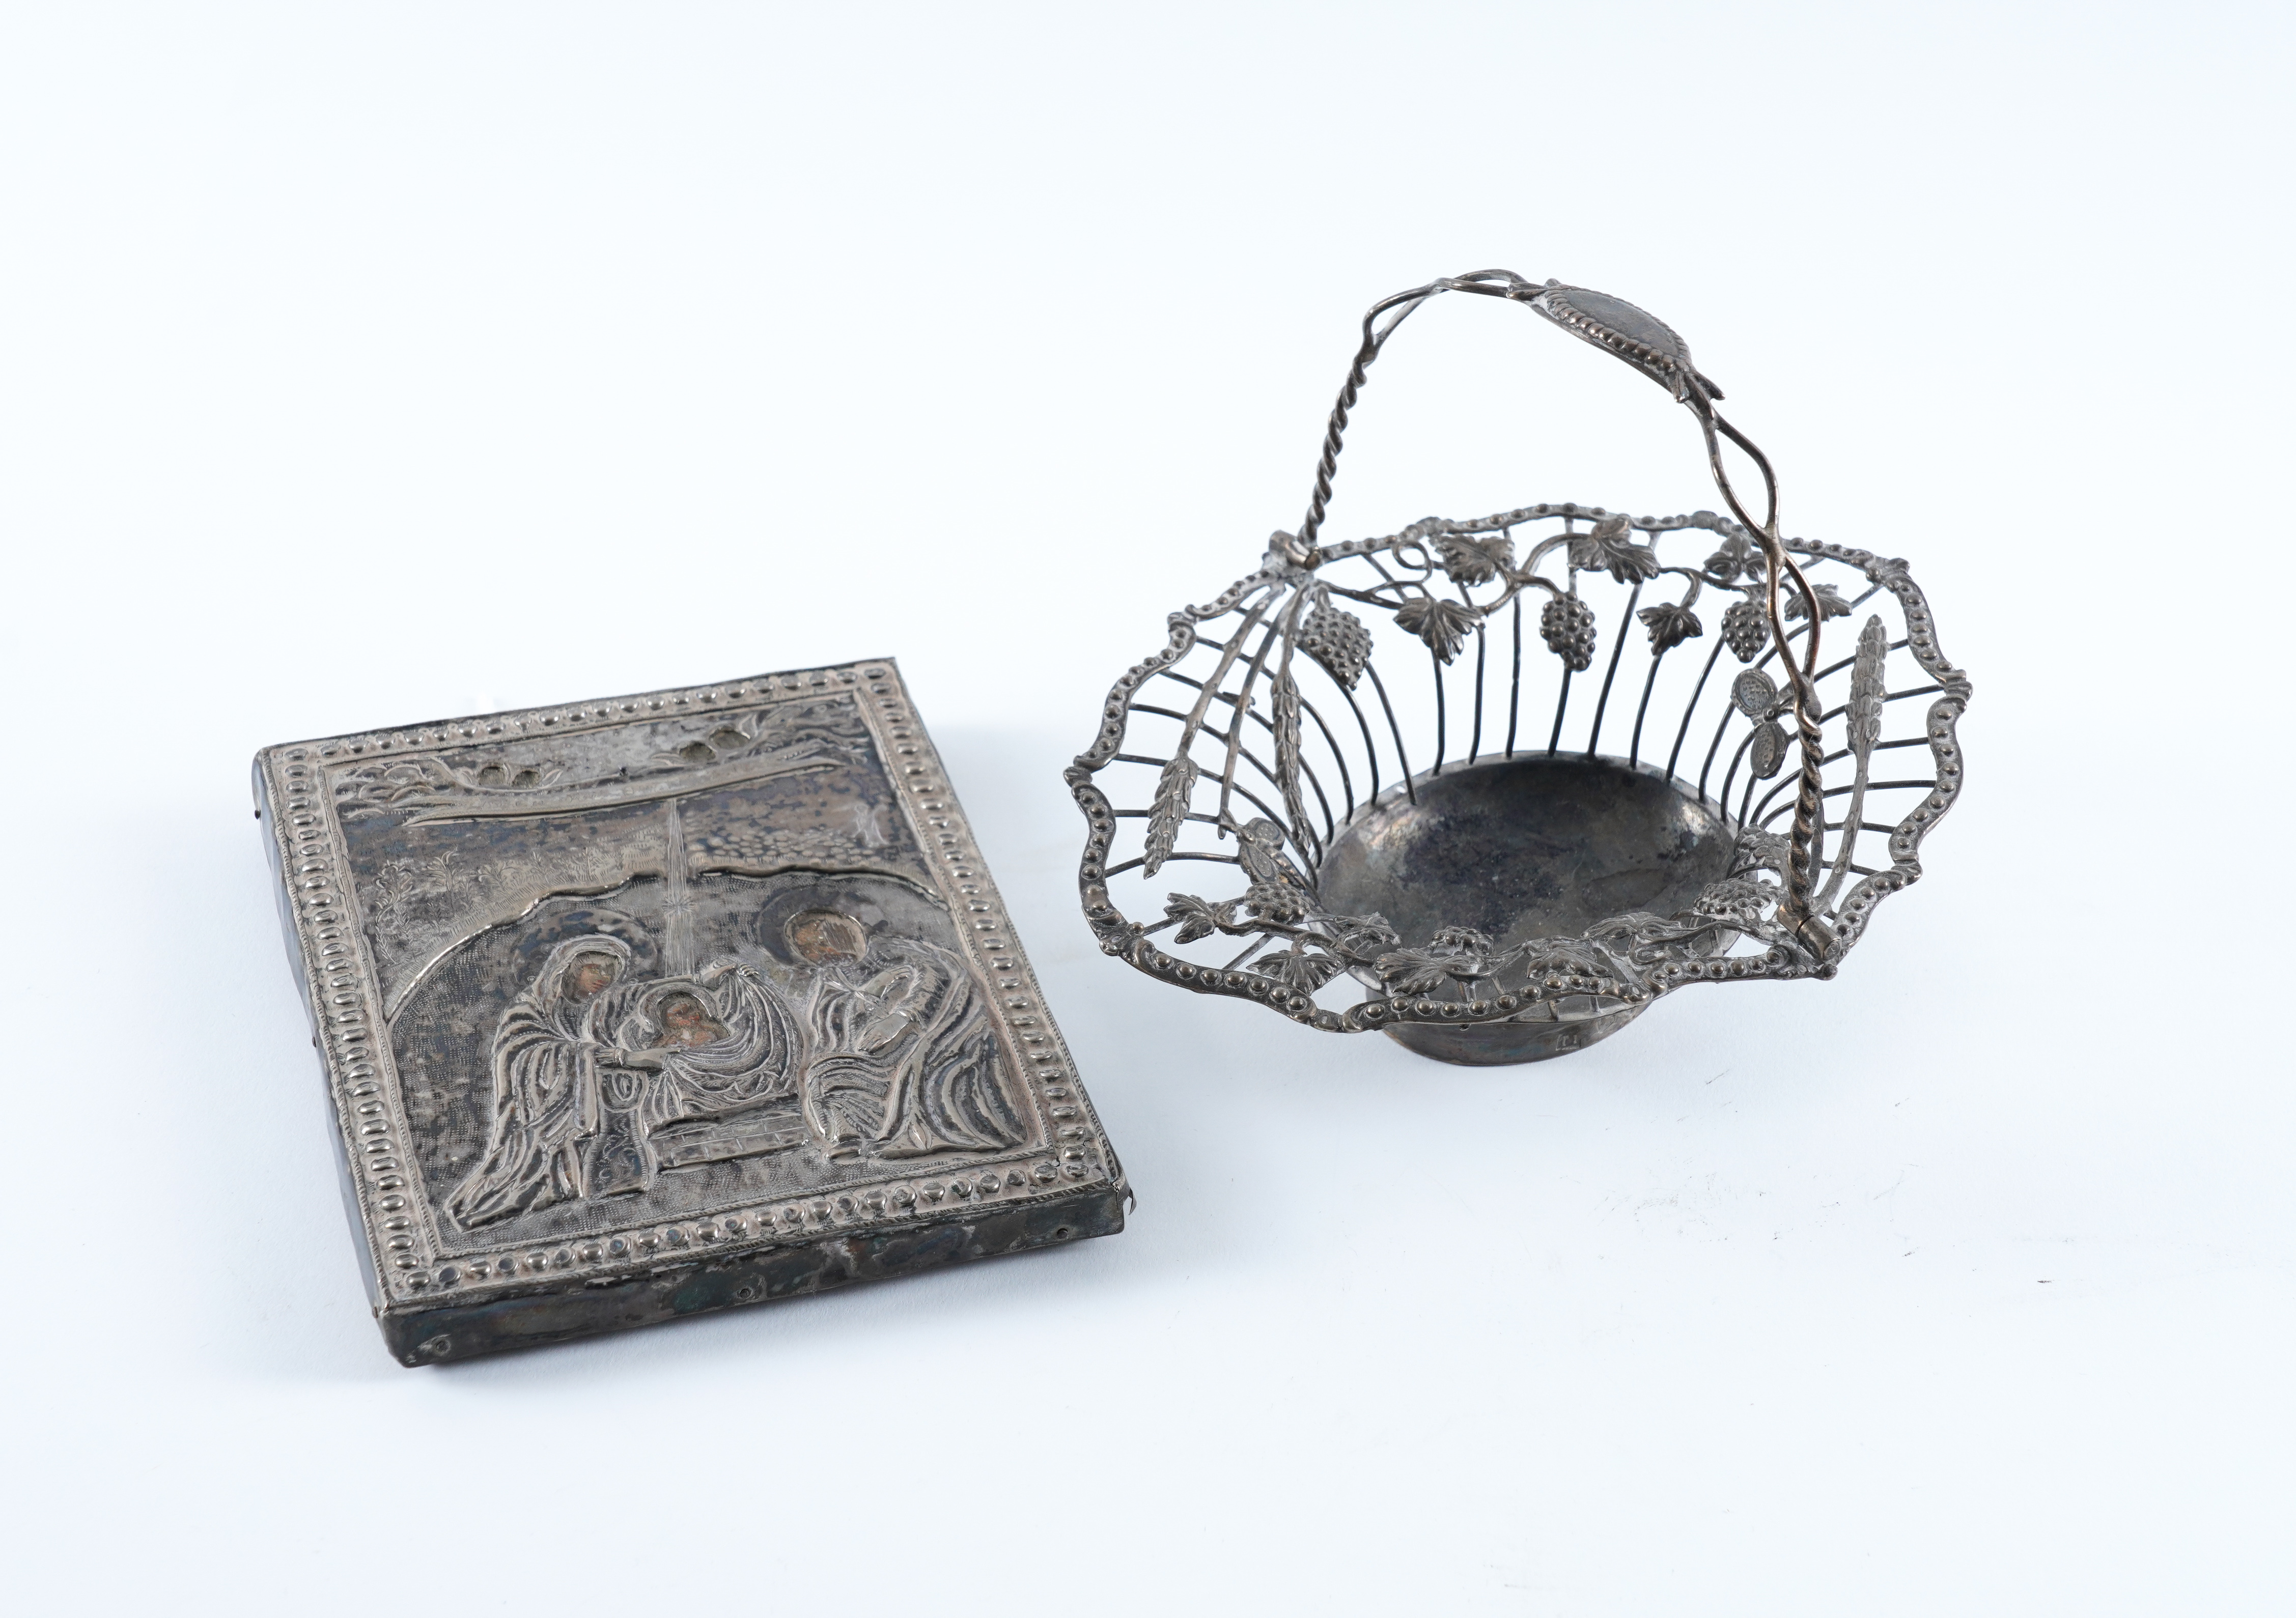 A SILVER EPERGNE BASKET AND AN ICON